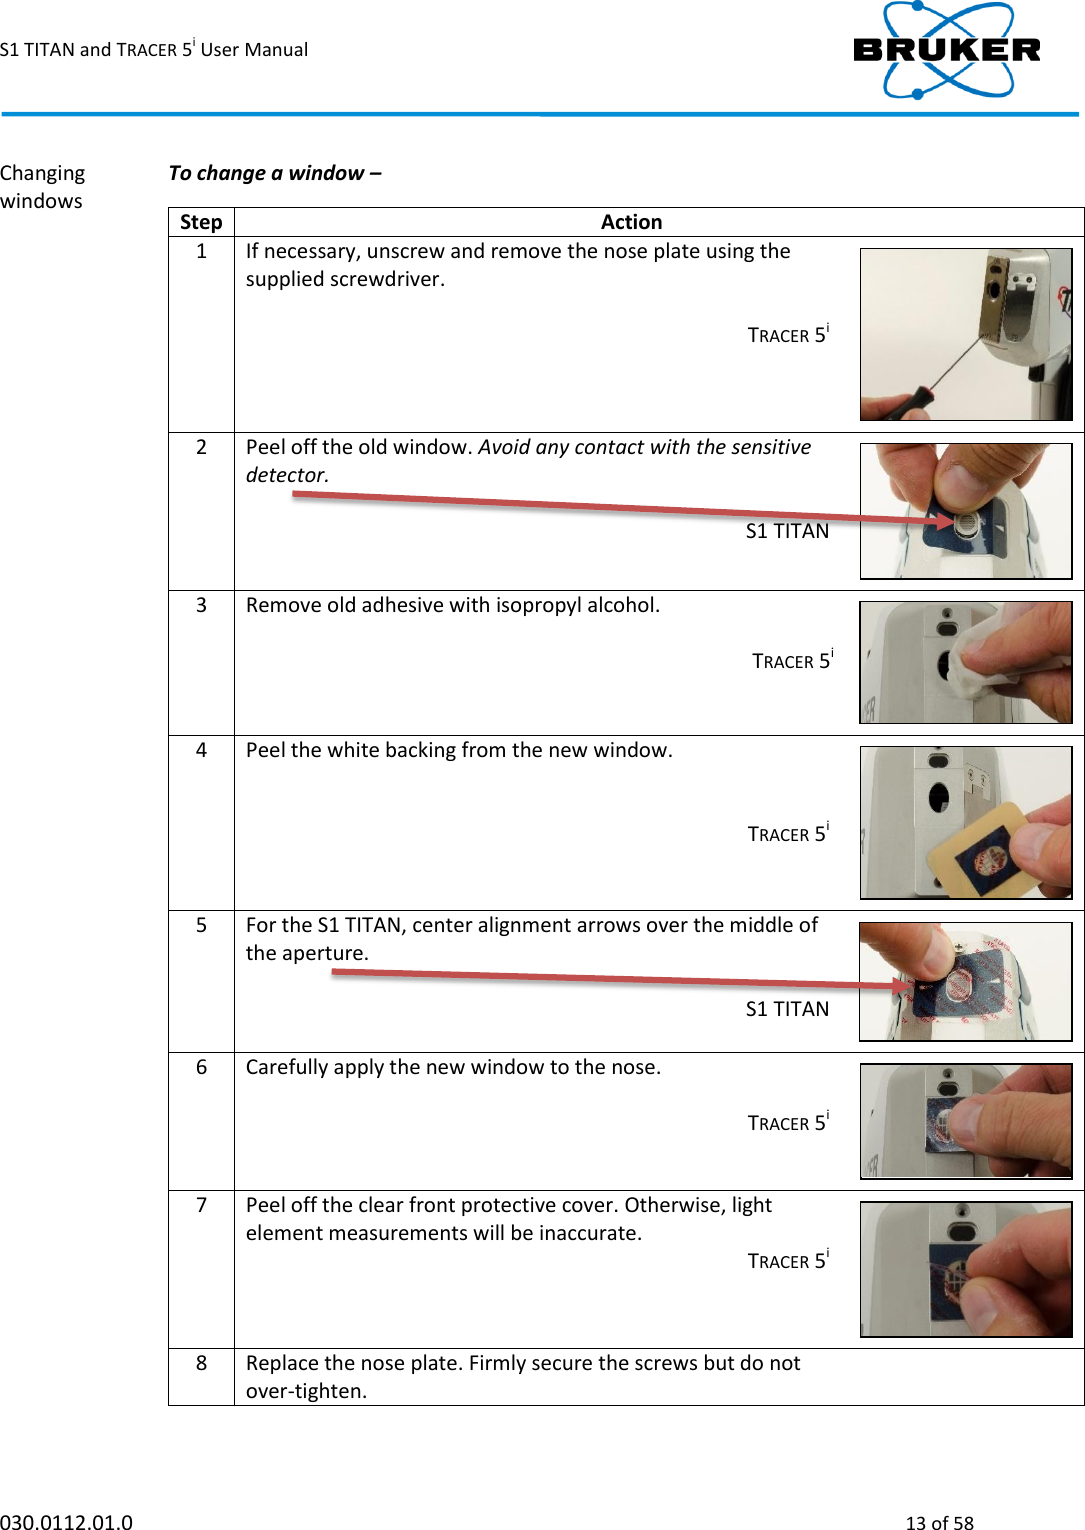 S1 TITAN and TRACER 5i User Manual  030.0112.01.0  13 of 58 Changing windows  To change a window –   Step Action  1 If necessary, unscrew and remove the nose plate using the supplied screwdriver.  TRACER 5i    2 Peel off the old window. Avoid any contact with the sensitive detector.   S1 TITAN    3 Remove old adhesive with isopropyl alcohol.   TRACER 5i    4 Peel the white backing from the new window.    TRACER 5i    5 For the S1 TITAN, center alignment arrows over the middle of the aperture.   S1 TITAN    6 Carefully apply the new window to the nose.   TRACER 5i    7 Peel off the clear front protective cover. Otherwise, light element measurements will be inaccurate.  TRACER 5i    8 Replace the nose plate. Firmly secure the screws but do not over-tighten.     